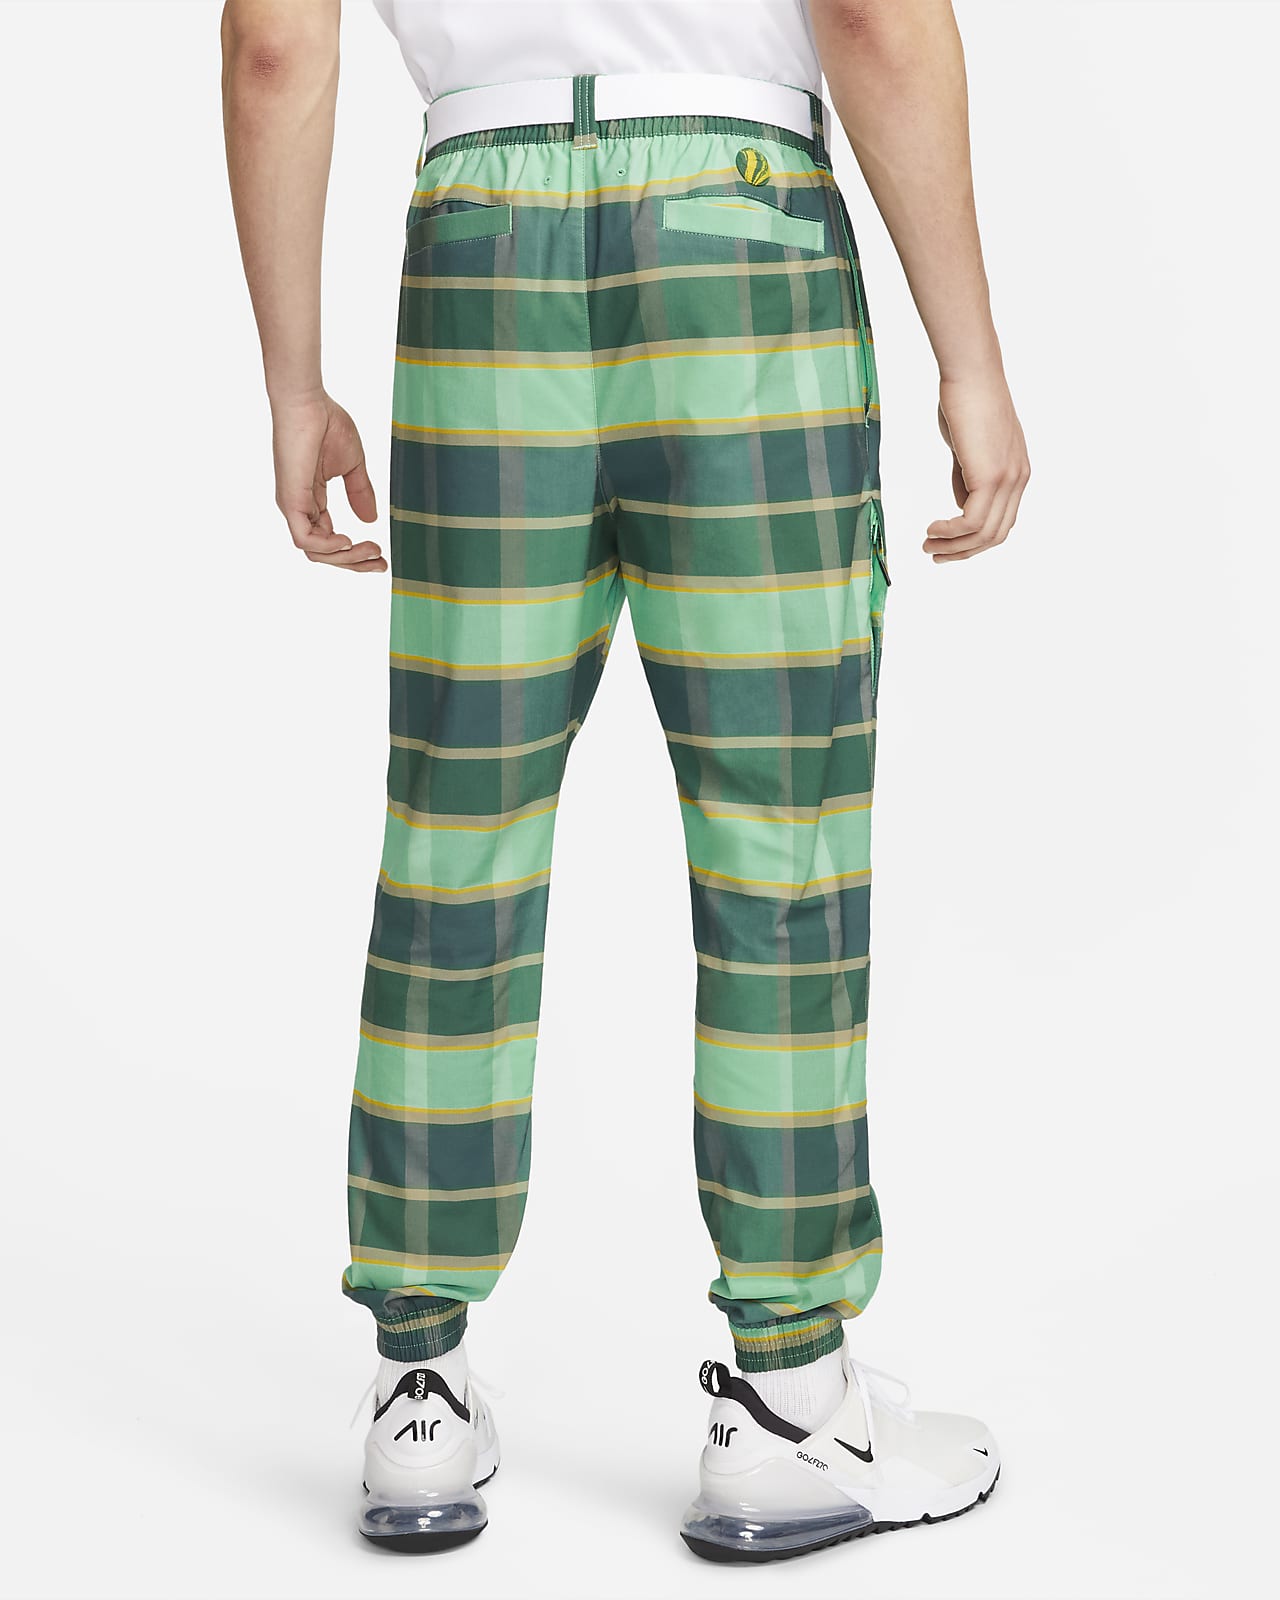 Plaid Golf Pants by Nike Golf | Bowties and Boatshoes